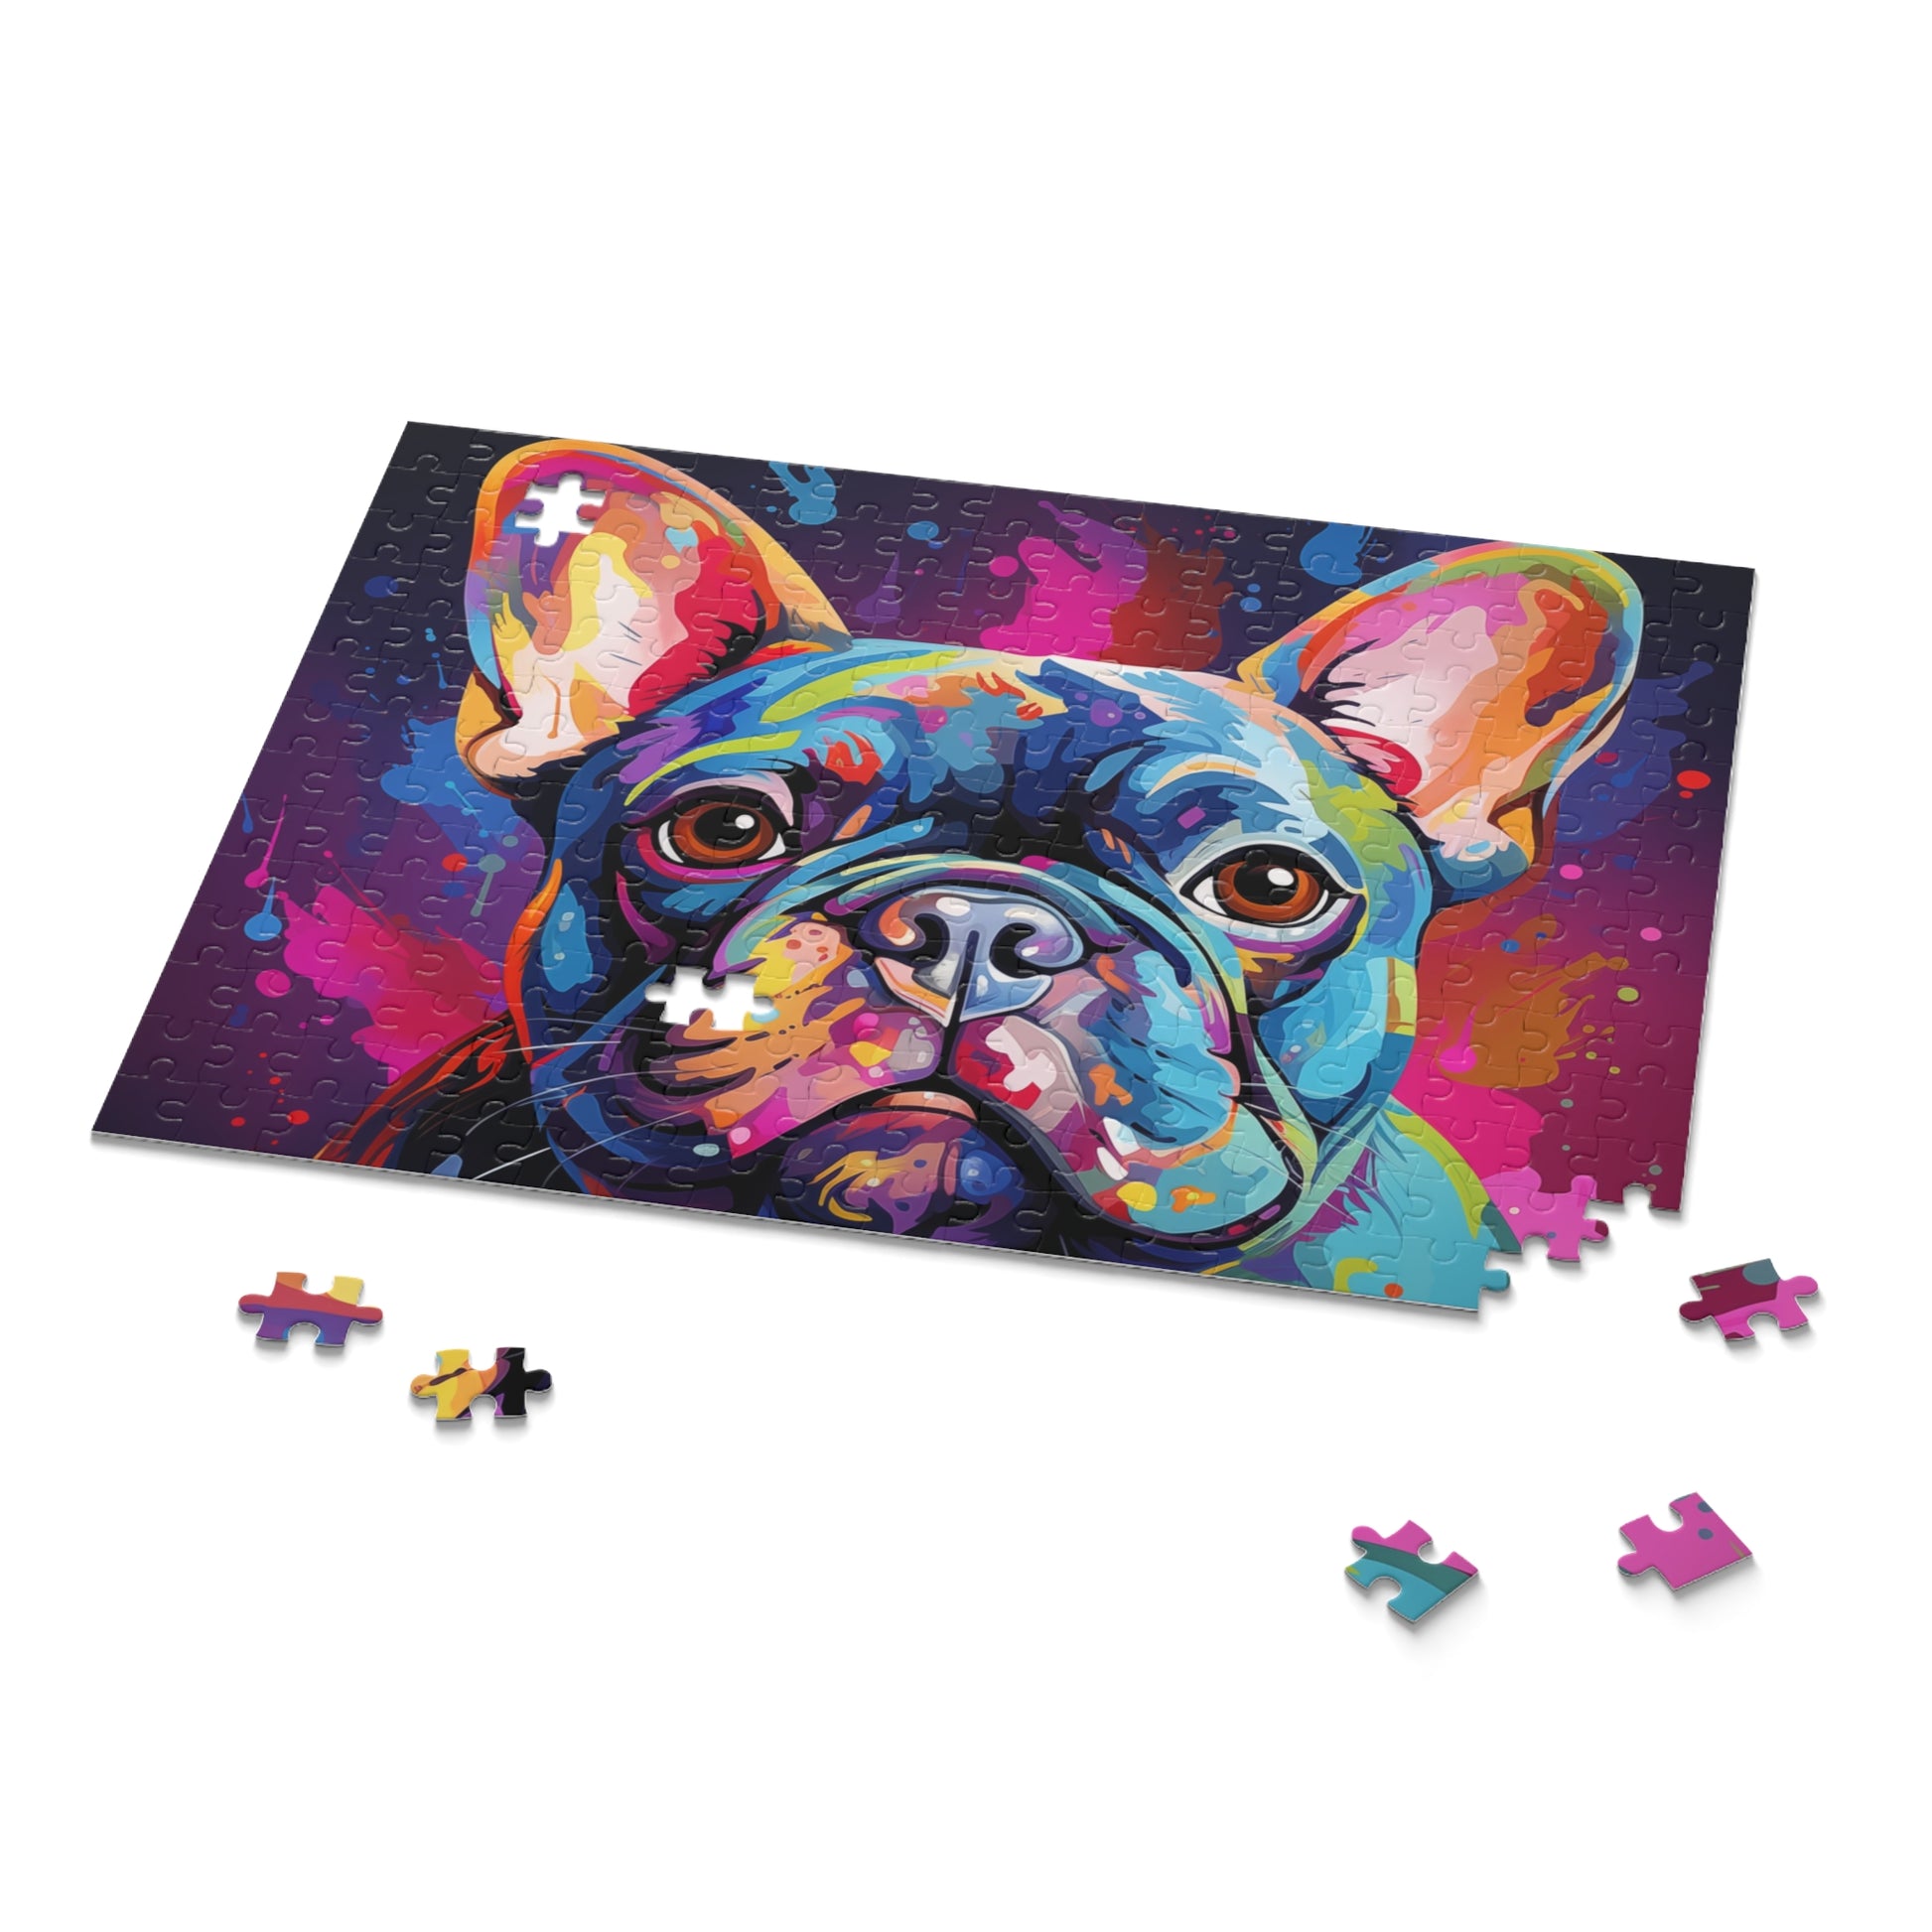 Oil Paint Watercolor Abstract Frenchie Dog Jigsaw Puzzle Adult Birthday Business Jigsaw Puzzle Gift for Him Funny Humorous Indoor Outdoor Game Gift For Her Online-9